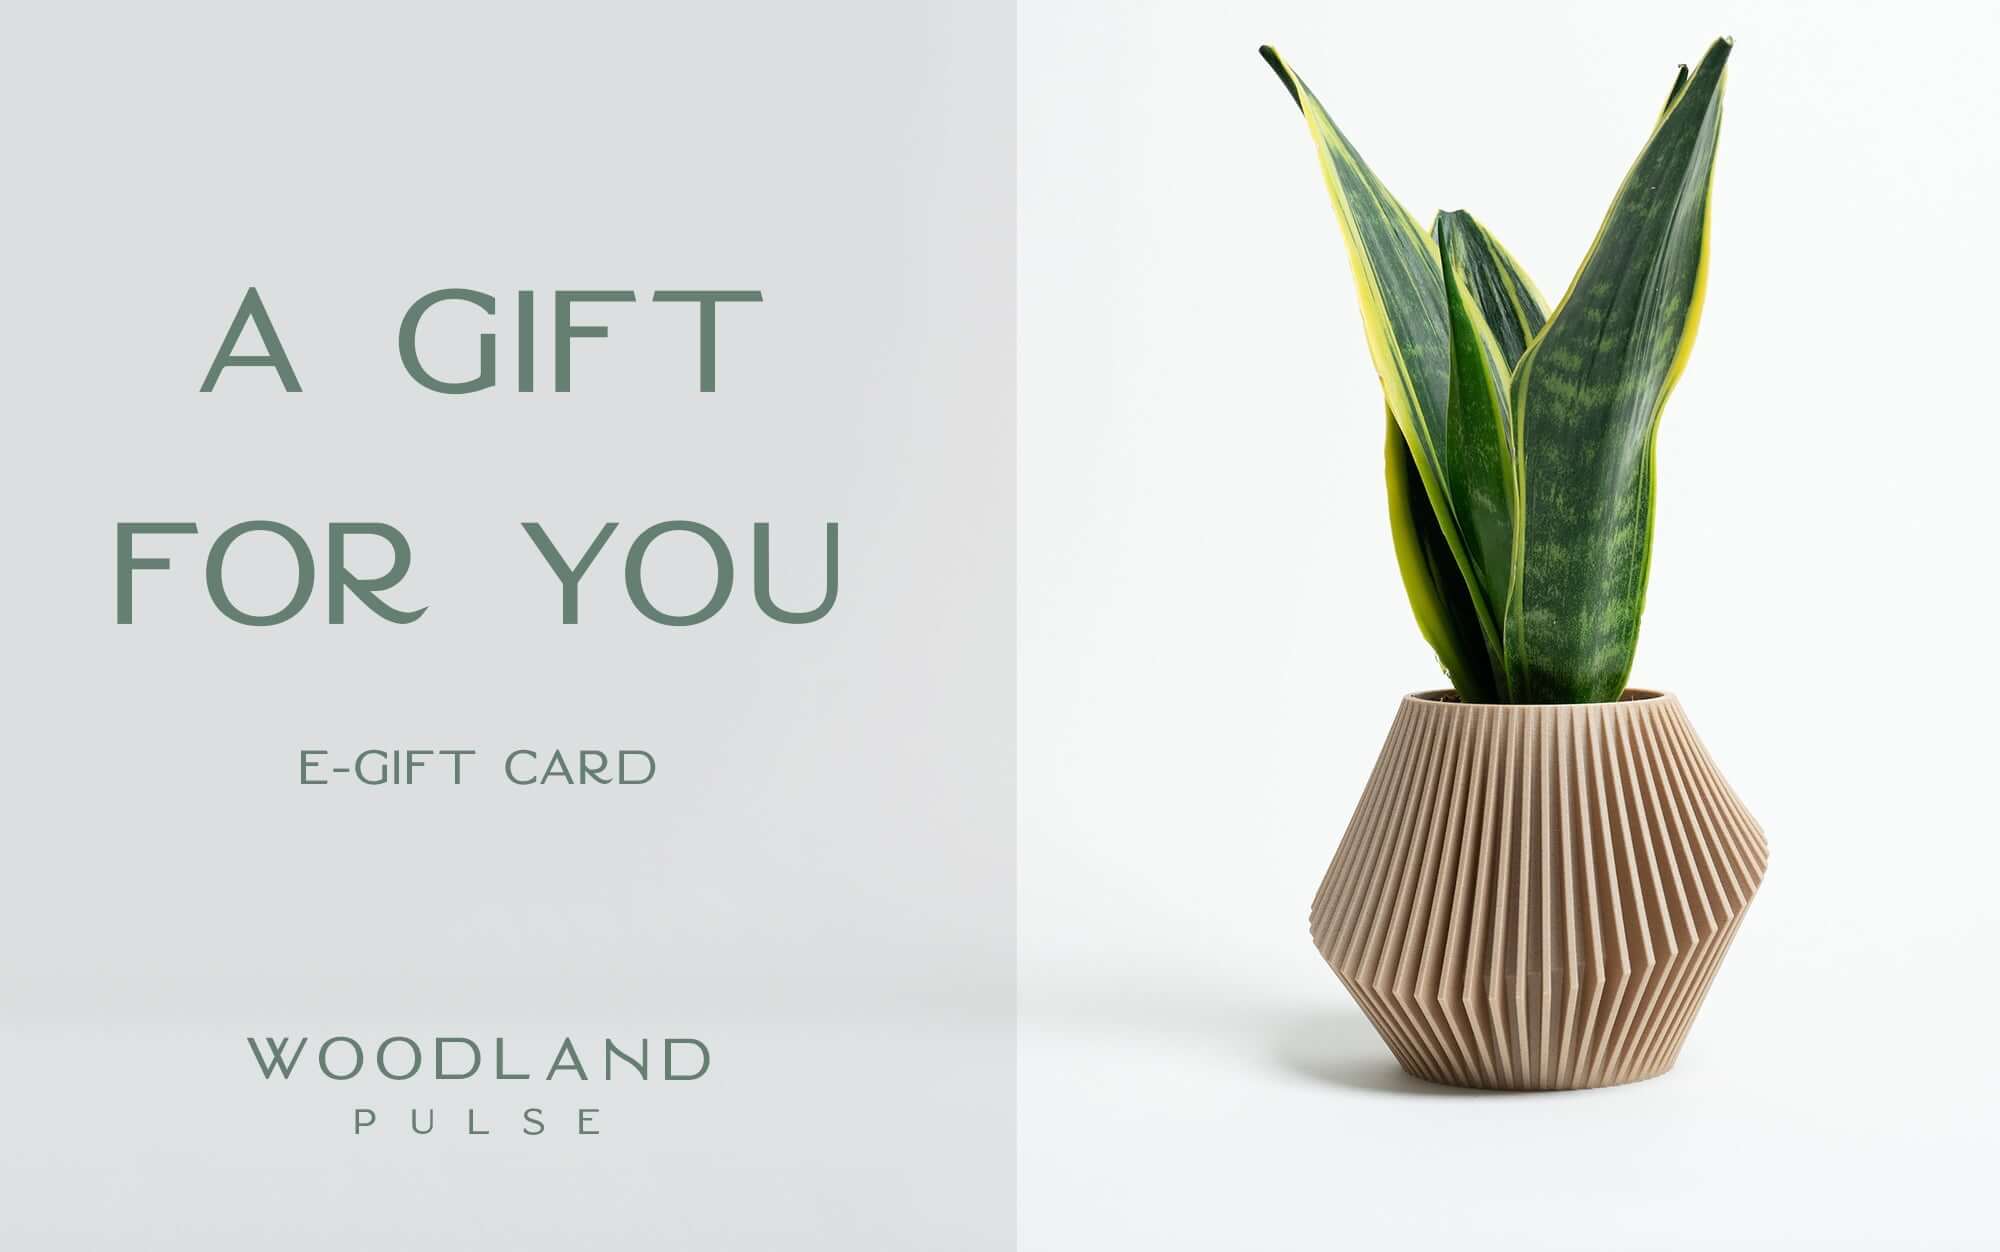 Woodland Pulse E-Gift Card - Give the Gift of Sustainable Style Woodland Pulse Modern Planters Unique planters Modern Vases Unique Vases Modern Planter Unique planter